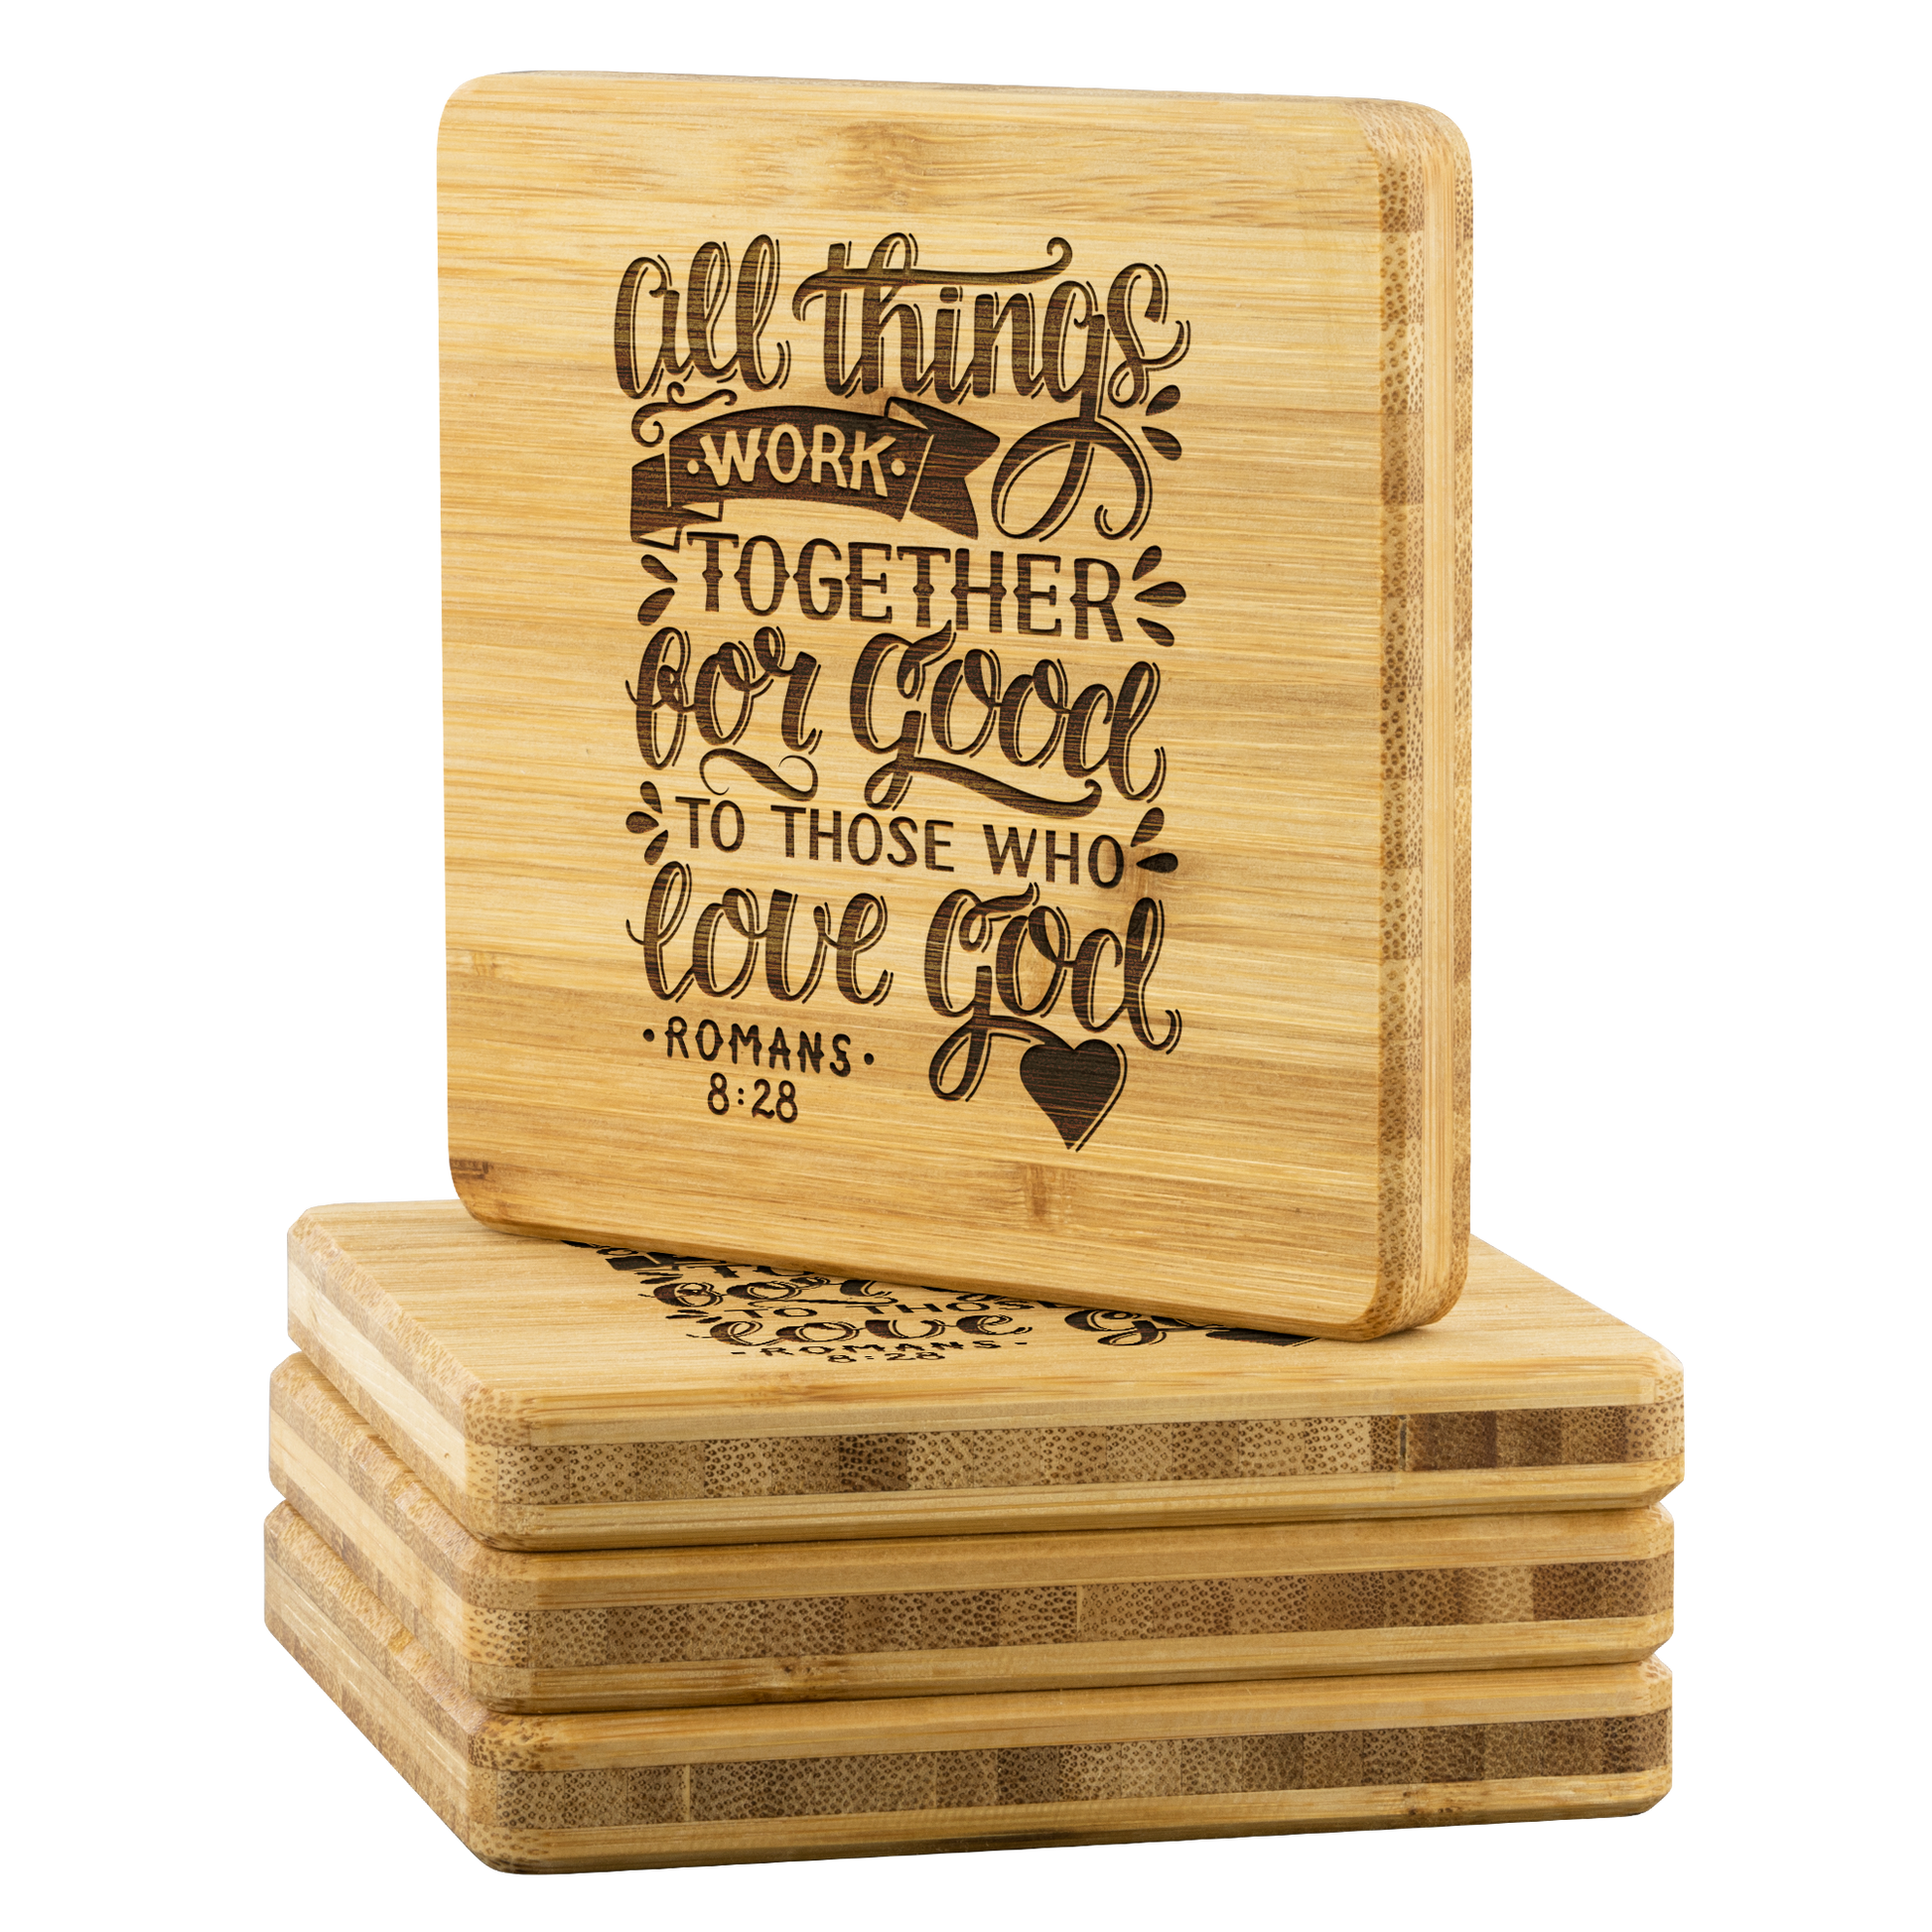 All Things Work Together For Good To Those Who Love God - Bamboo Coasters stacked